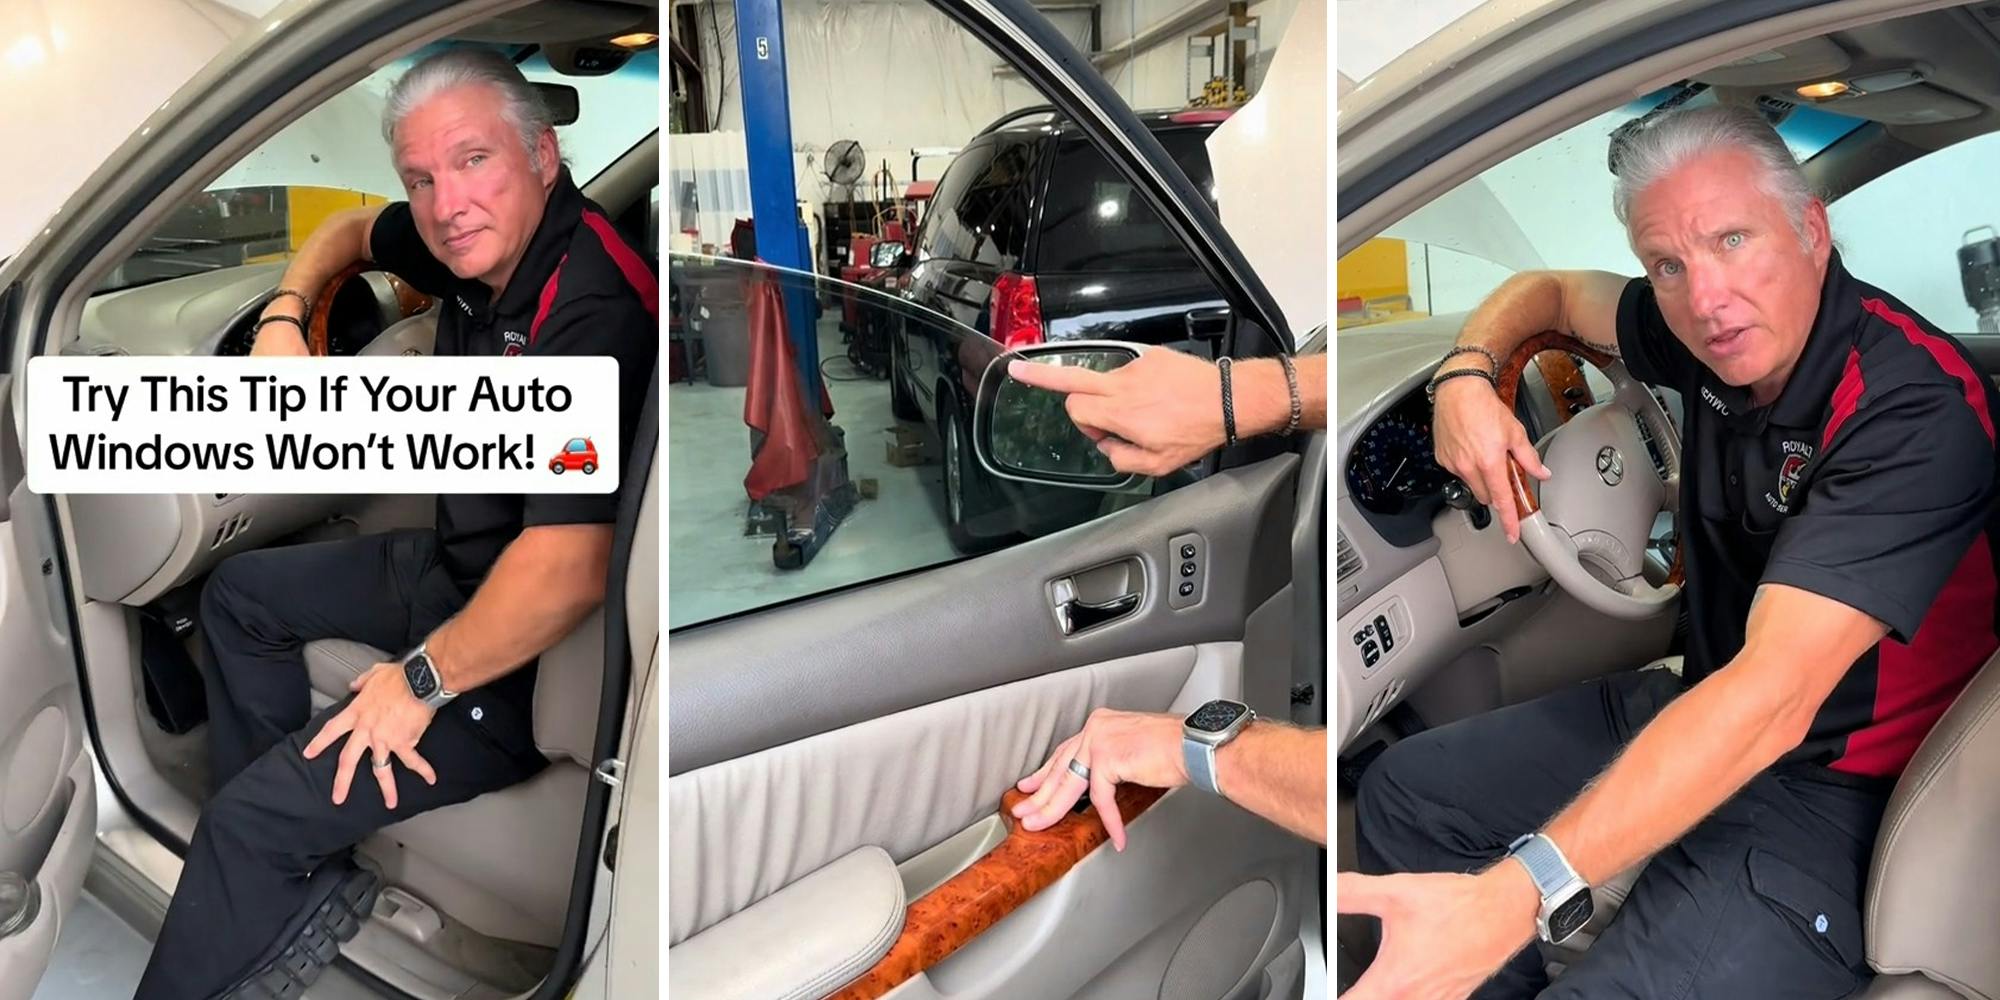 Mechanic shares how to fix automatic windows that don’t roll up, down